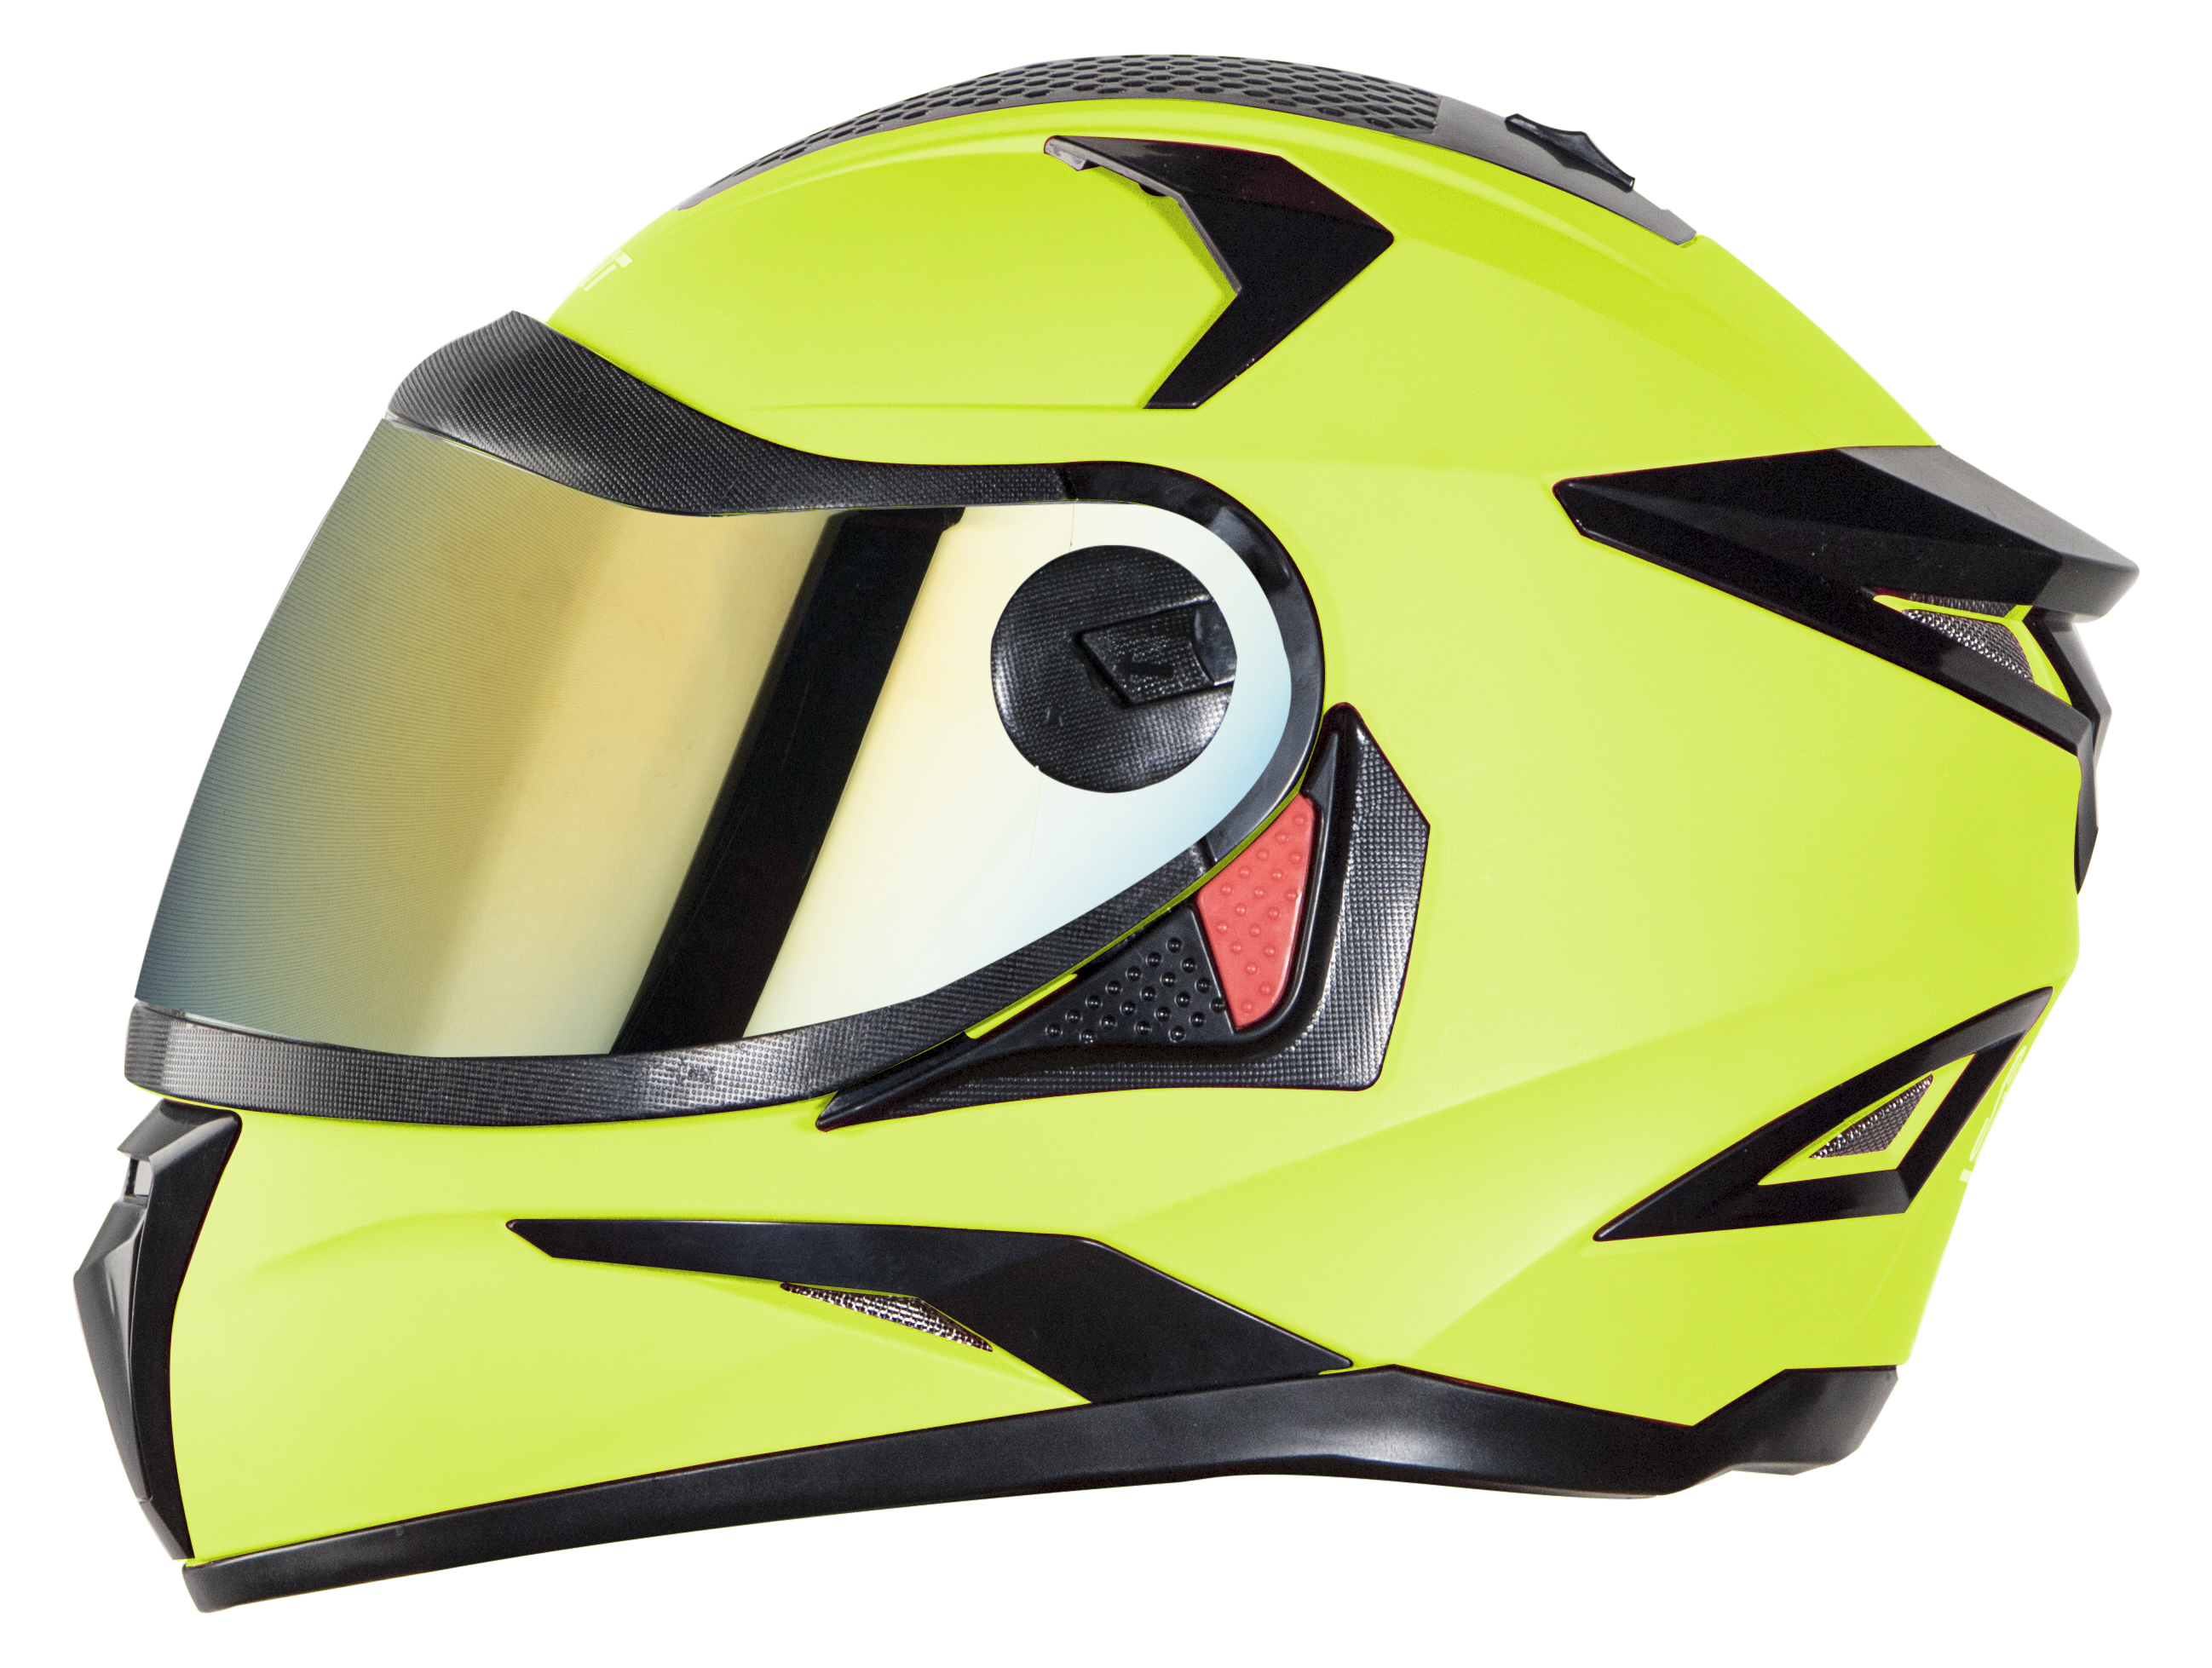 SBH-17 OPT GLOSSY FLUO NEON WITH CHROME GOLD VISOR (WITH EXTRA FREE CABLE LOCK AND CLEAR VISOR)